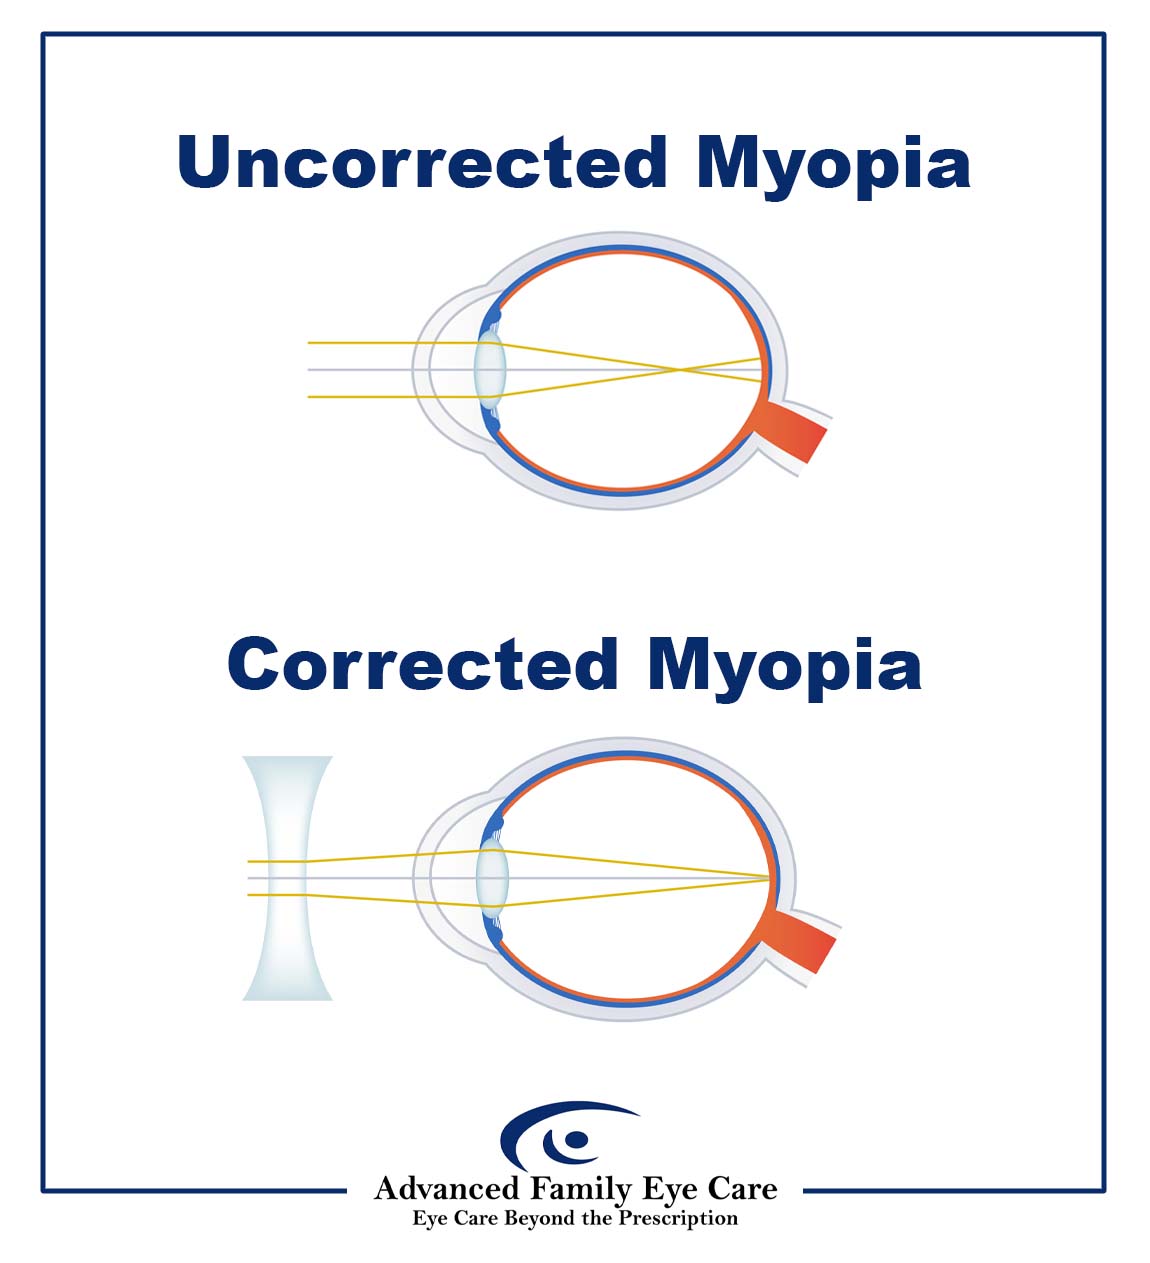 Infographic illustrating myopia correction with eyeglass or contact lenses. Diagram 1 shows an untreated myopic eye, where light enters and is bent before the retina, causing blurred vision. Diagram 2 shows myopia corrected with a concave lens. The concave lens bends light prior to entering the cornea, counteracting the misshaped eye, allowing light to focus on the retina for a clear distant image.